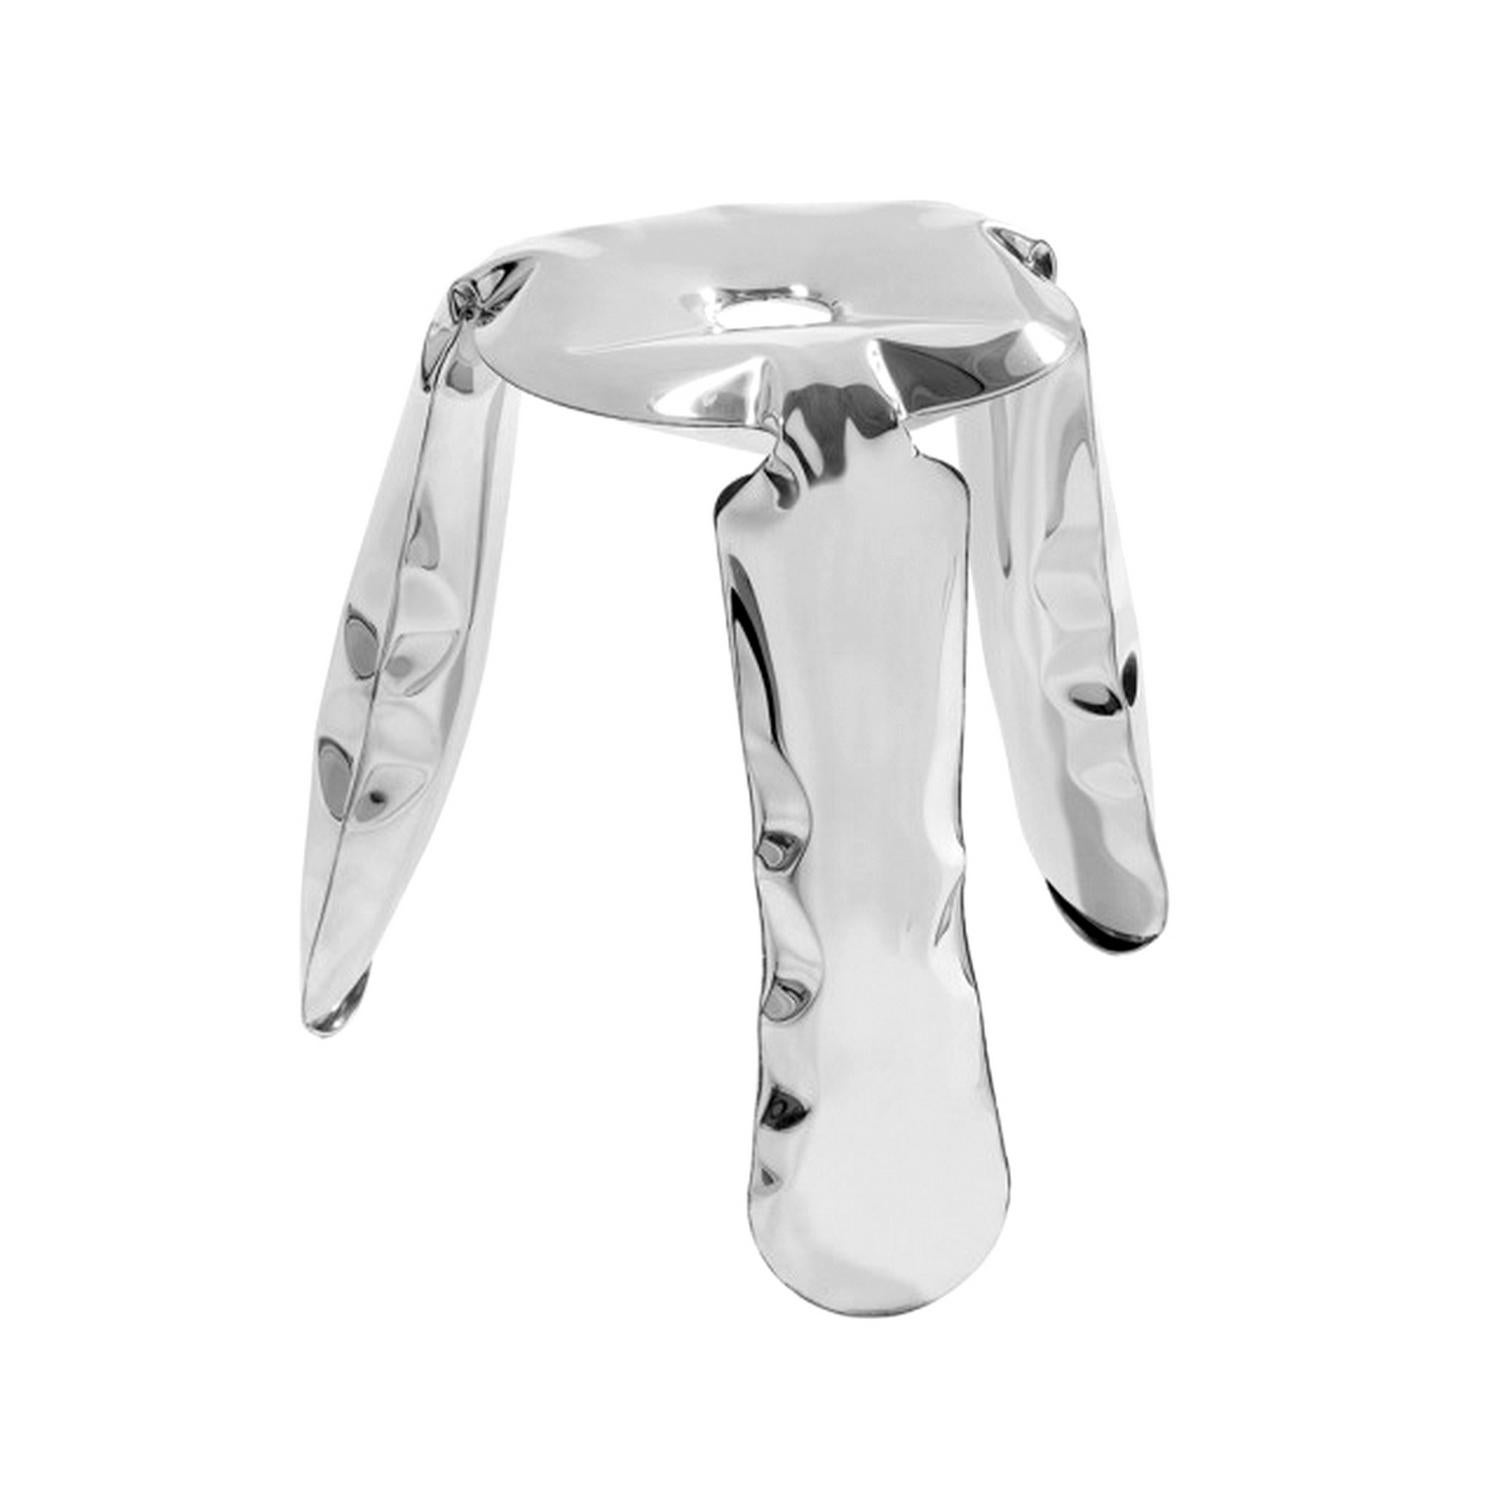 Contemporary In Stock in Los Angeles, Limited Edition Counter Stool Polished Stainless Steel